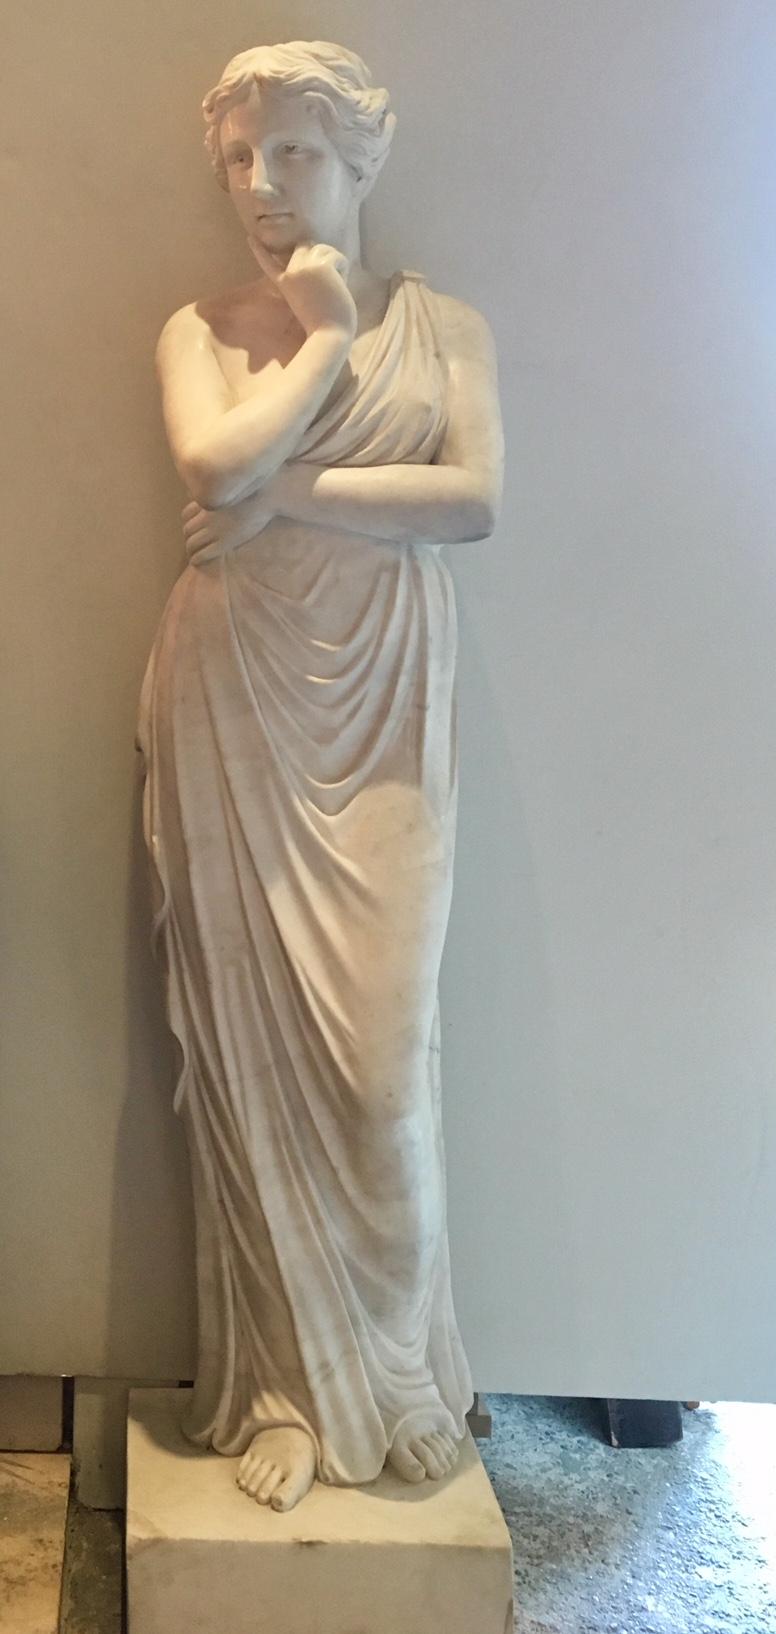 Beautiful hand-carved Venus sculpture after Greek and Roman examples. Made in Italy in the 20th century from high quality bright white Carrara marble. The sculpture is in a very good condition. 190 cm in height (including square basement), 40 cm